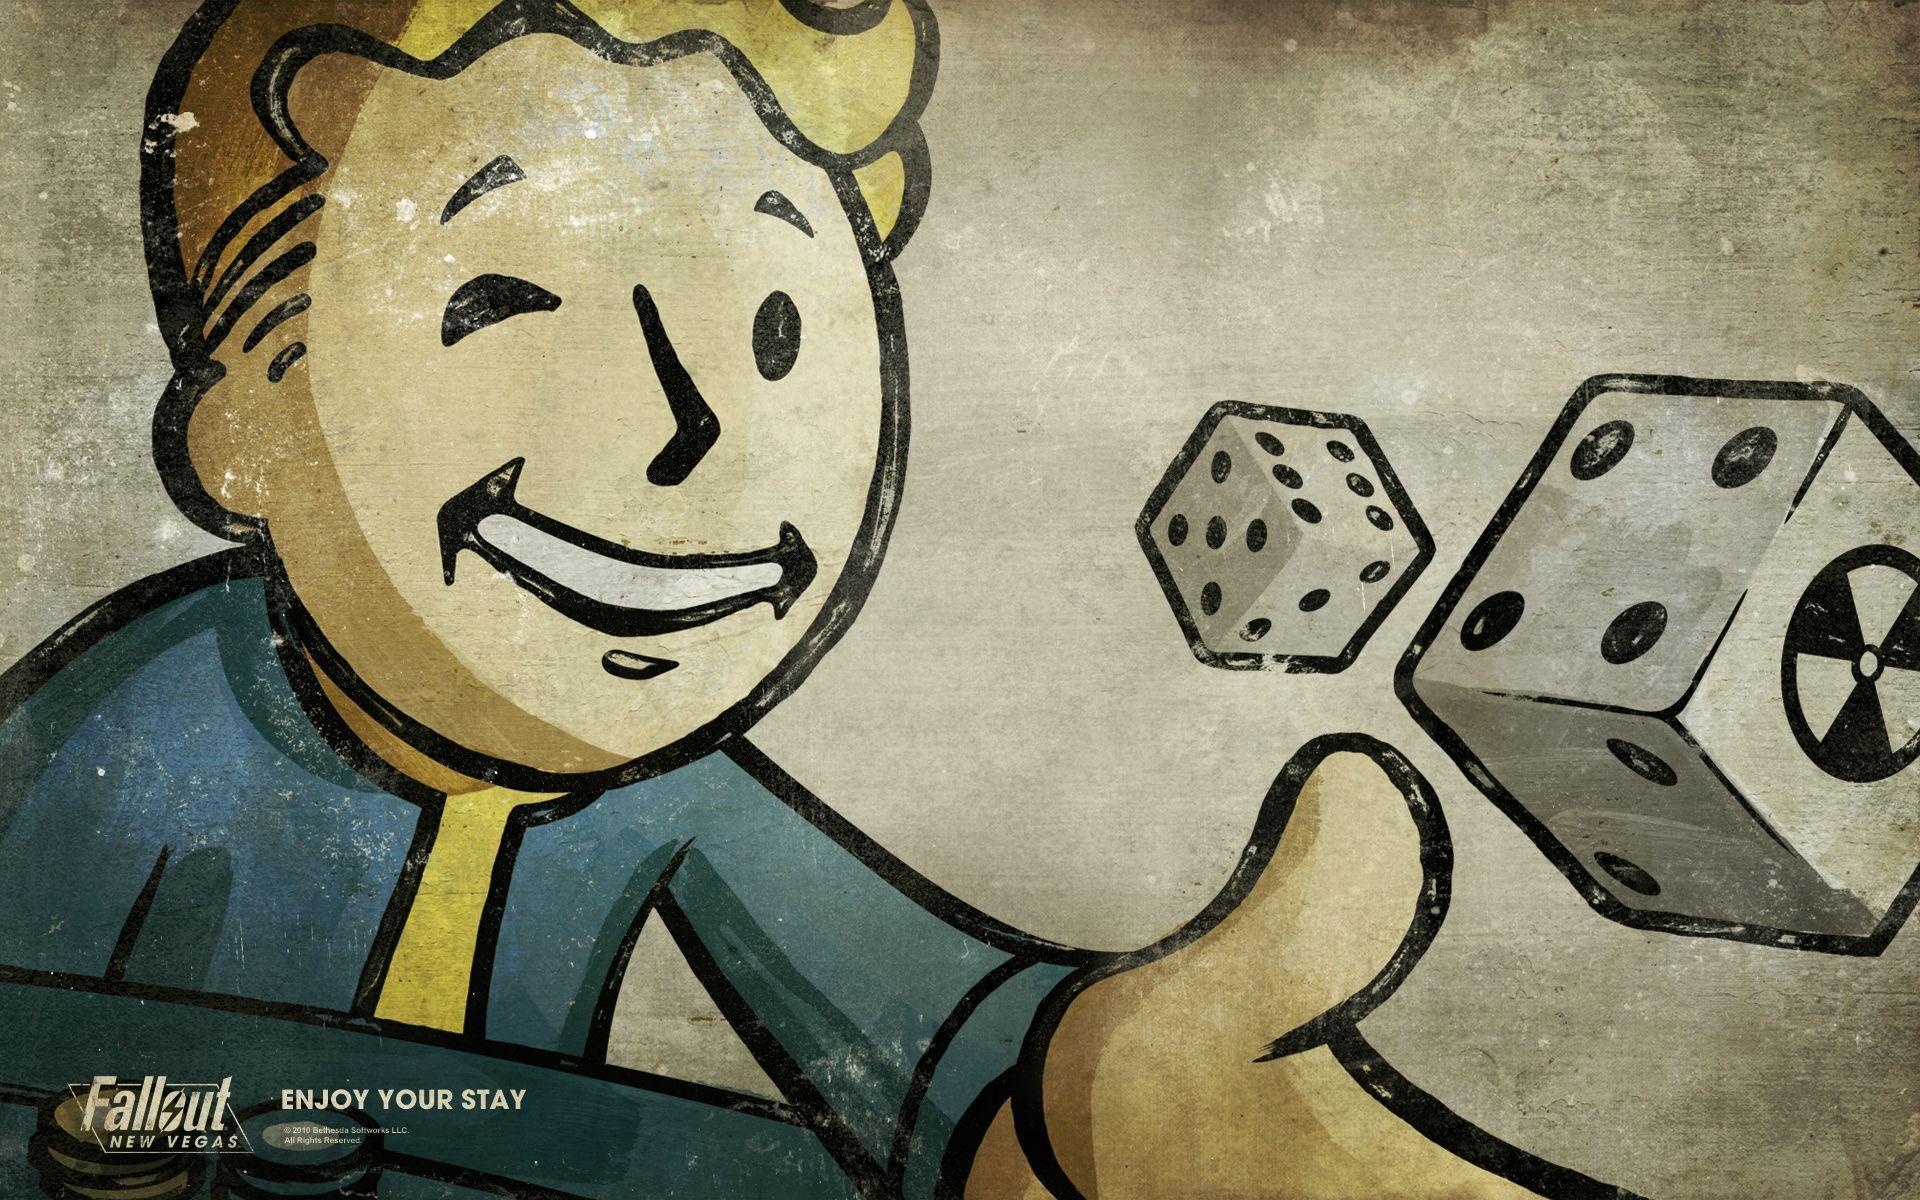 Fallout Wallpaper Desktop Background. Anything